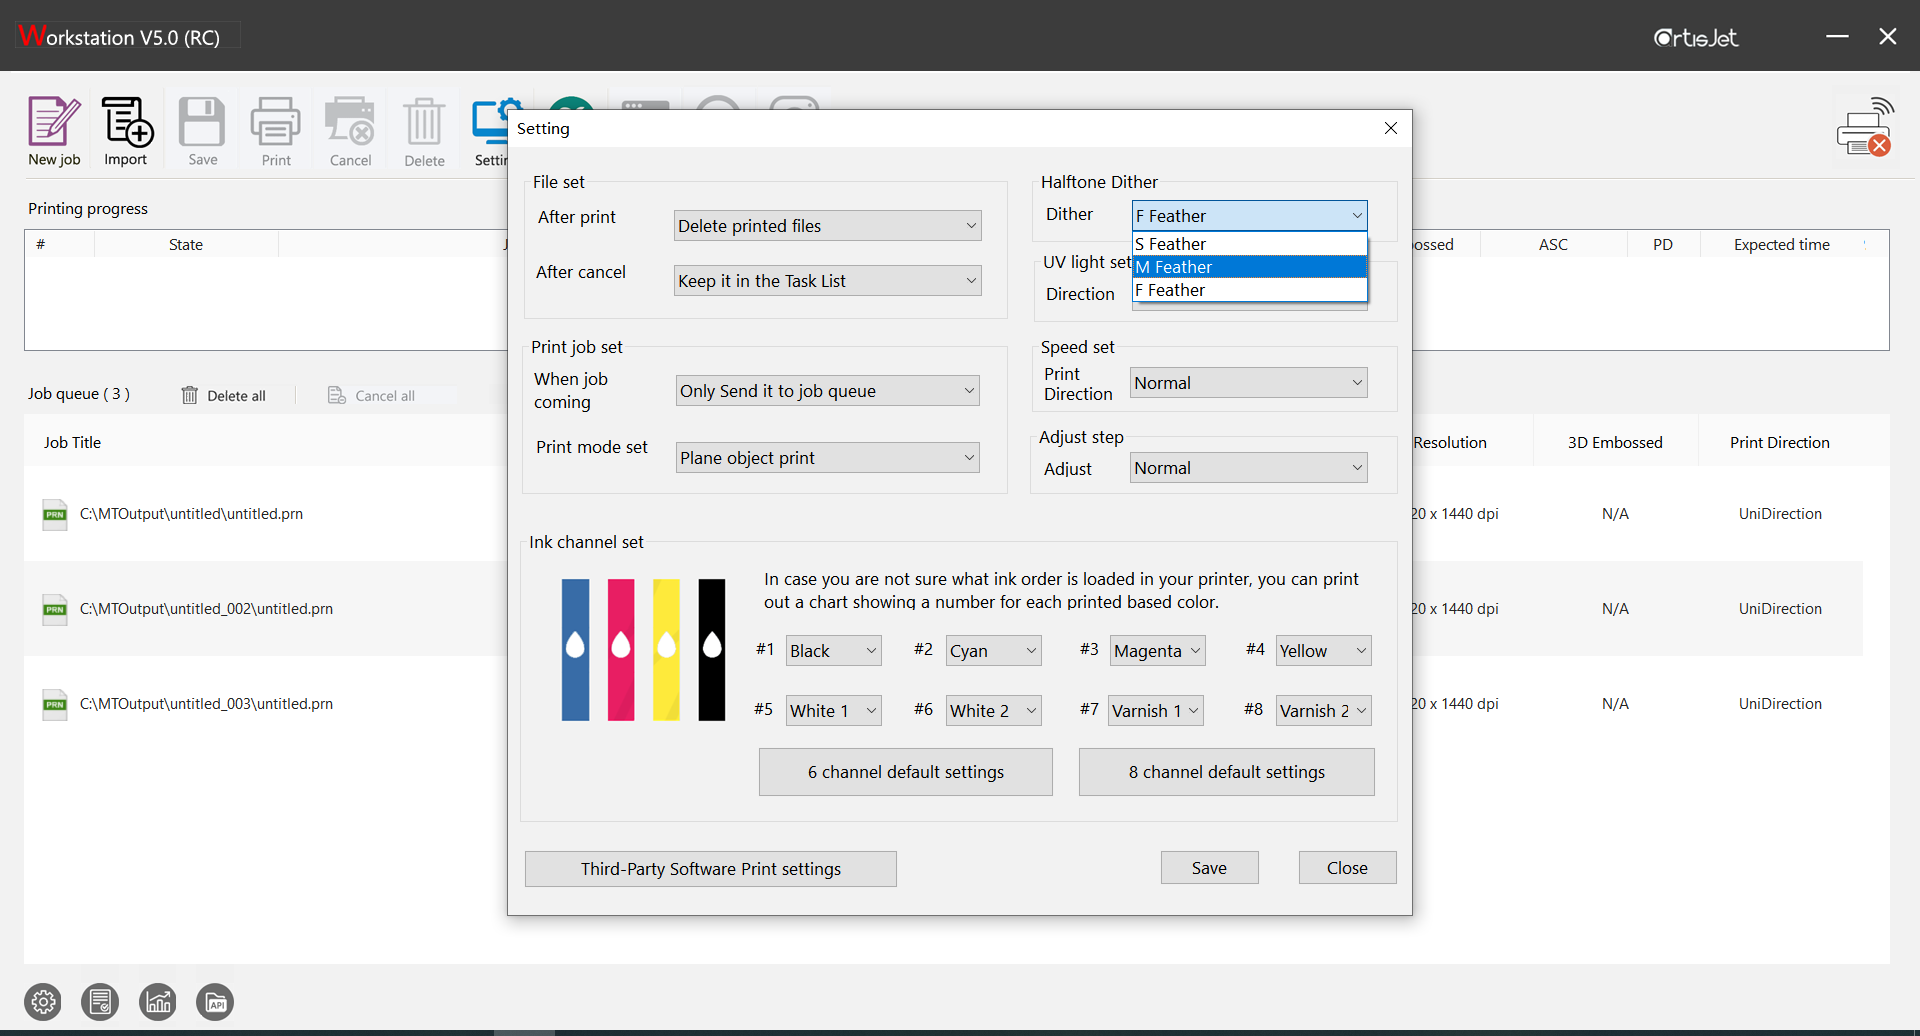 feather setting in printing software